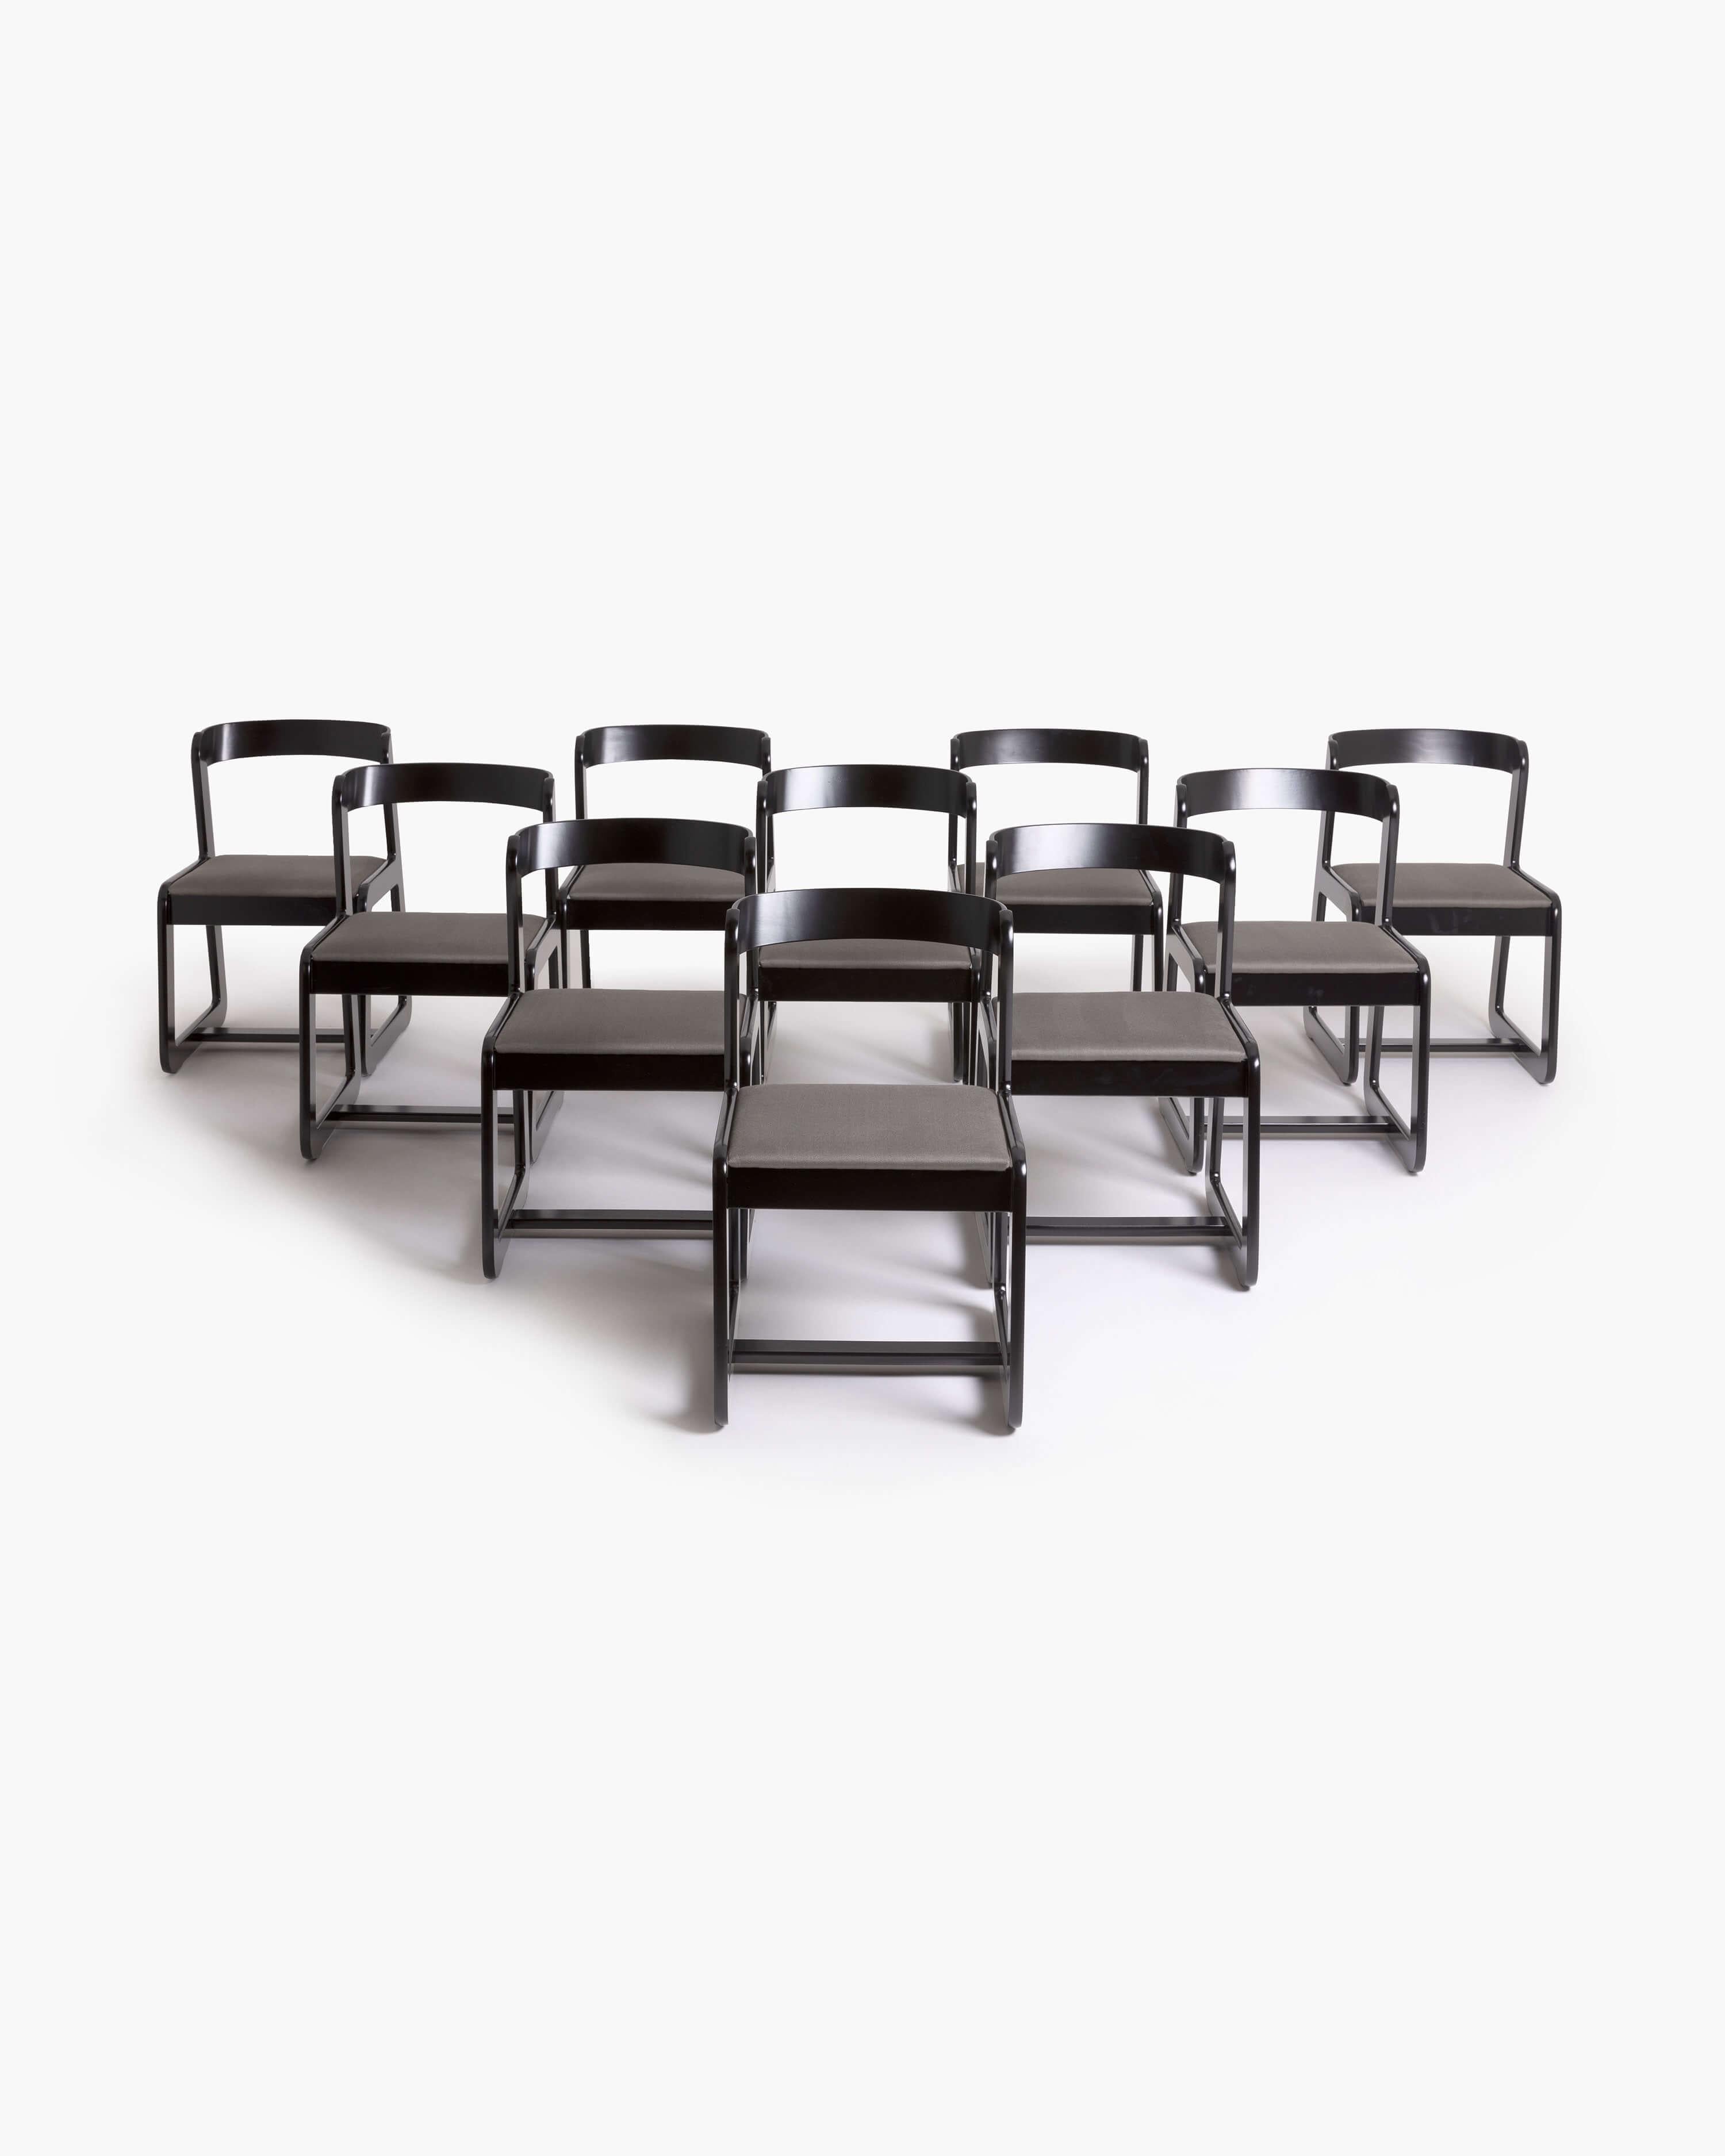 Enhance your dining experience with this exquisite set of ten dining chairs designed for Mario Sabot, circa 1970, in the distinguished style of Willy Rizzo. Crafted with meticulous attention to detail, these chairs feature a striking combination of